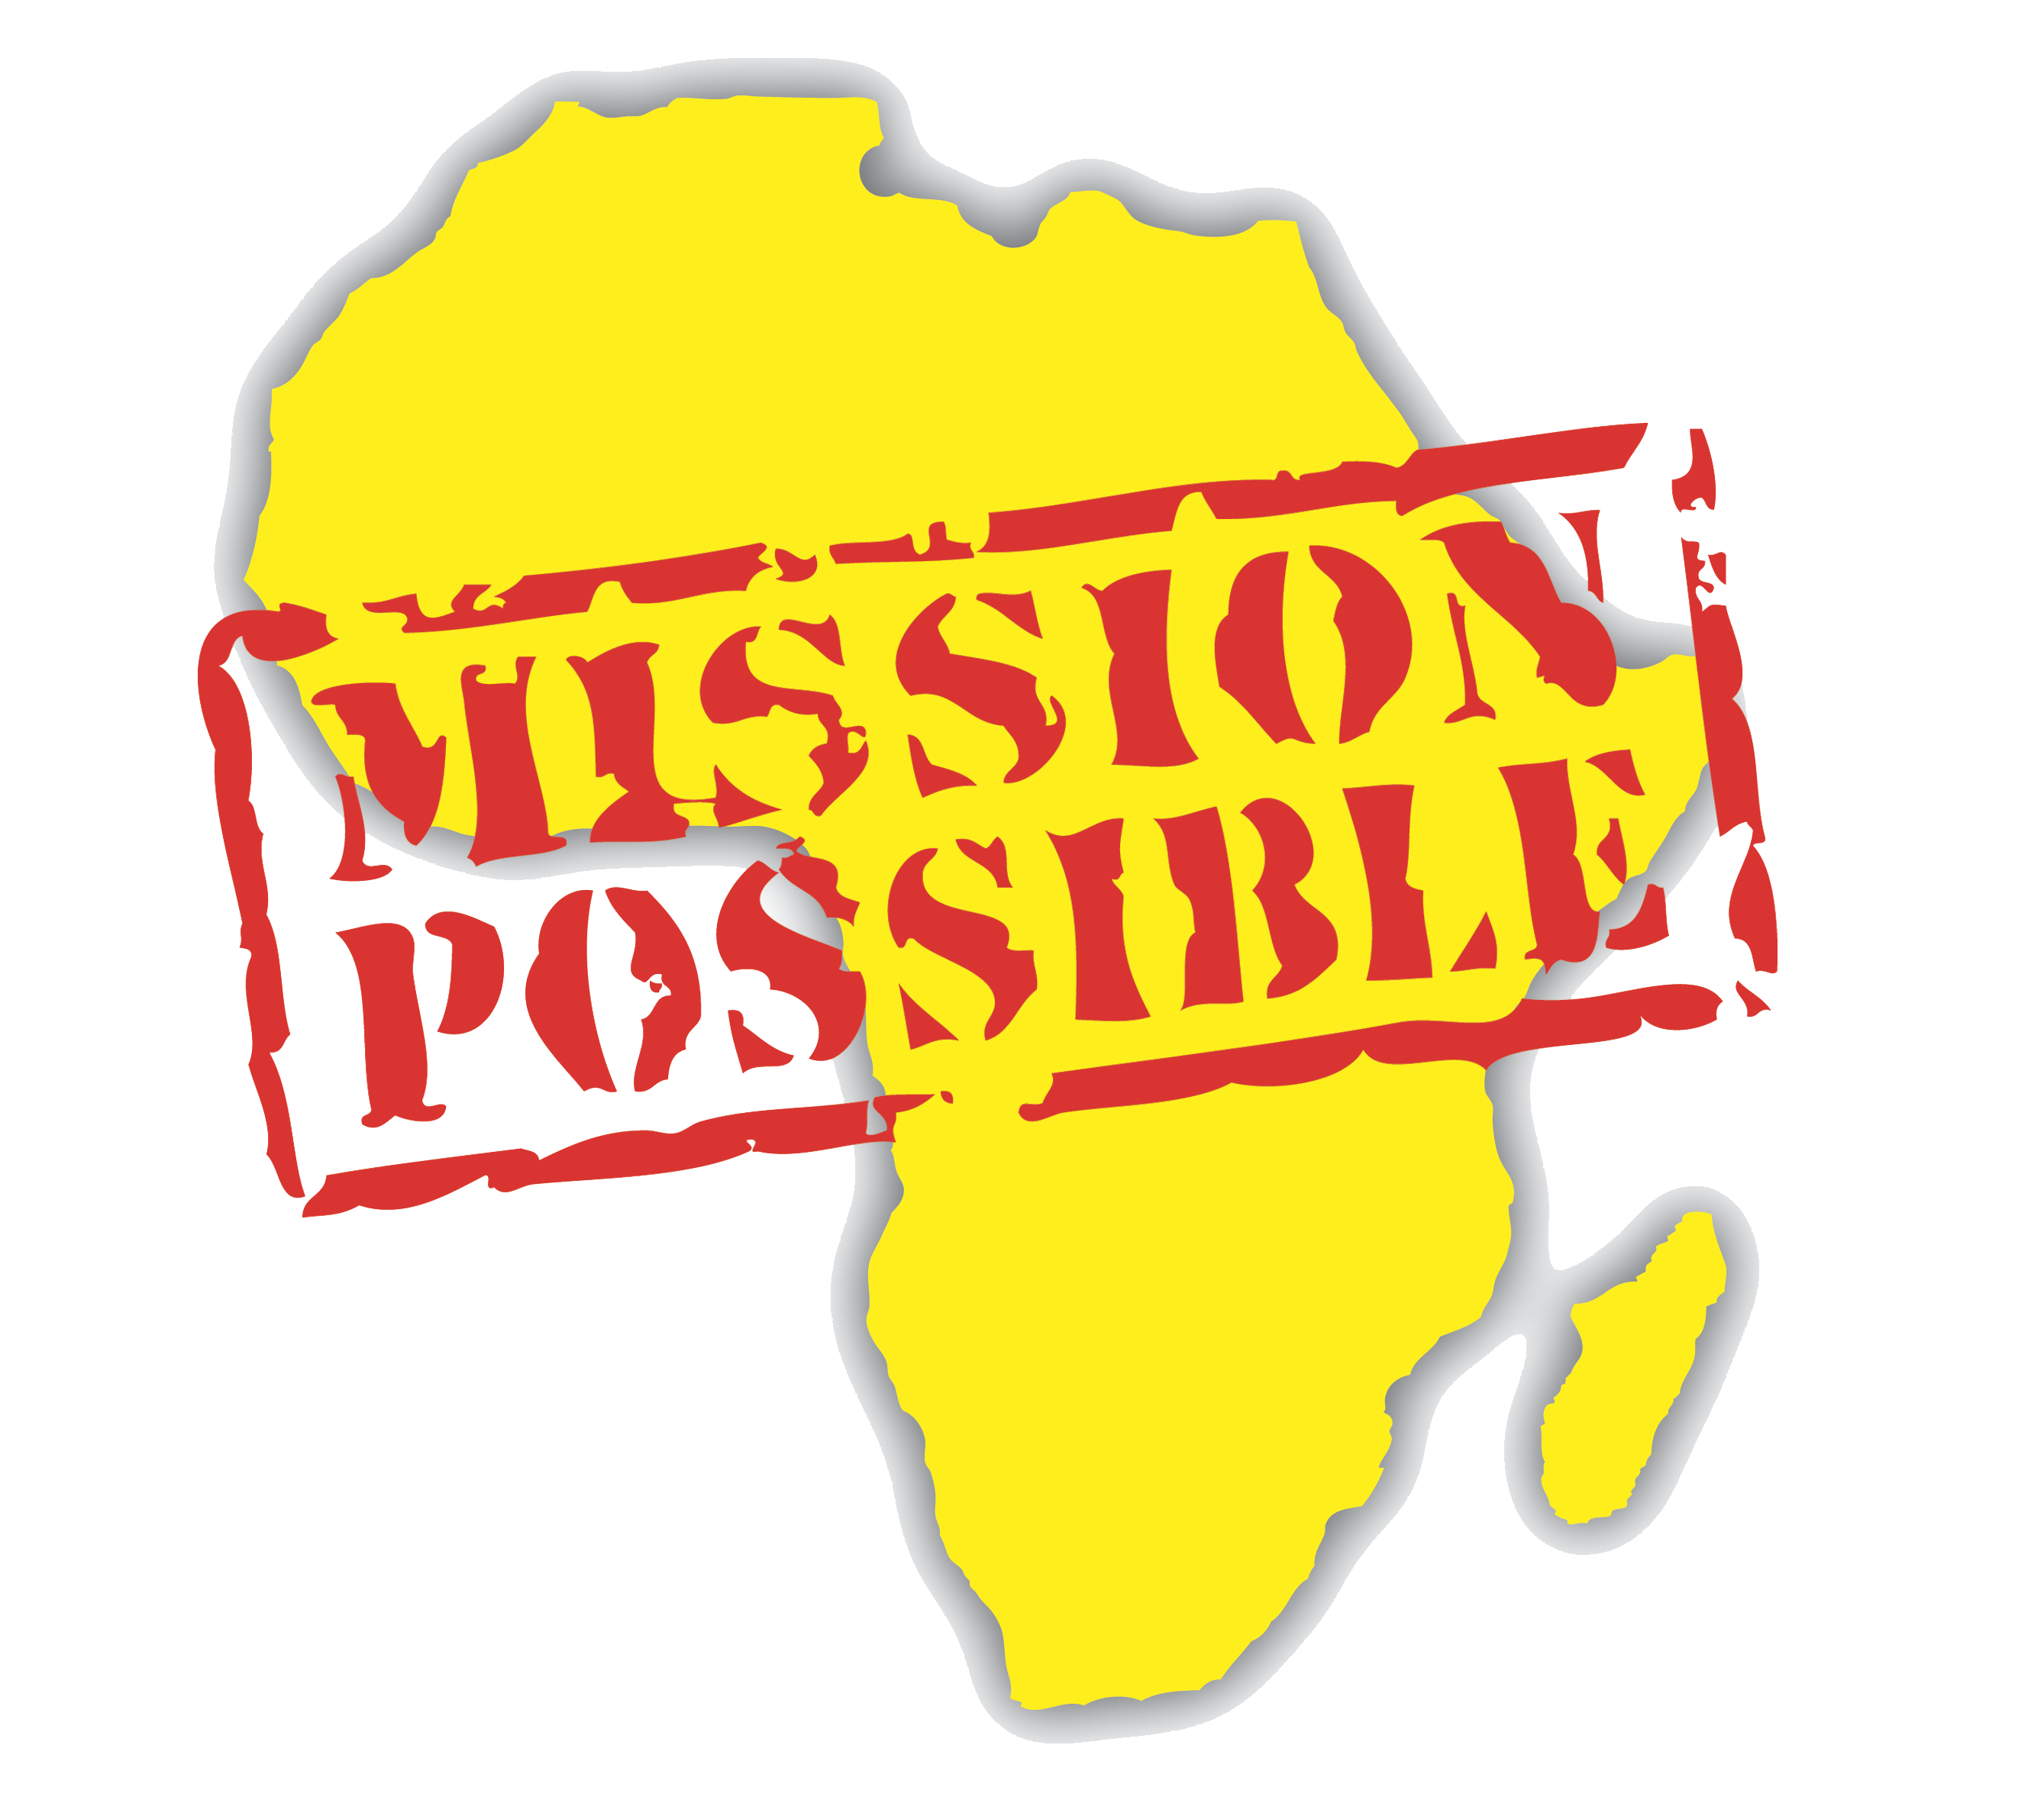 Africa Mission Possibile